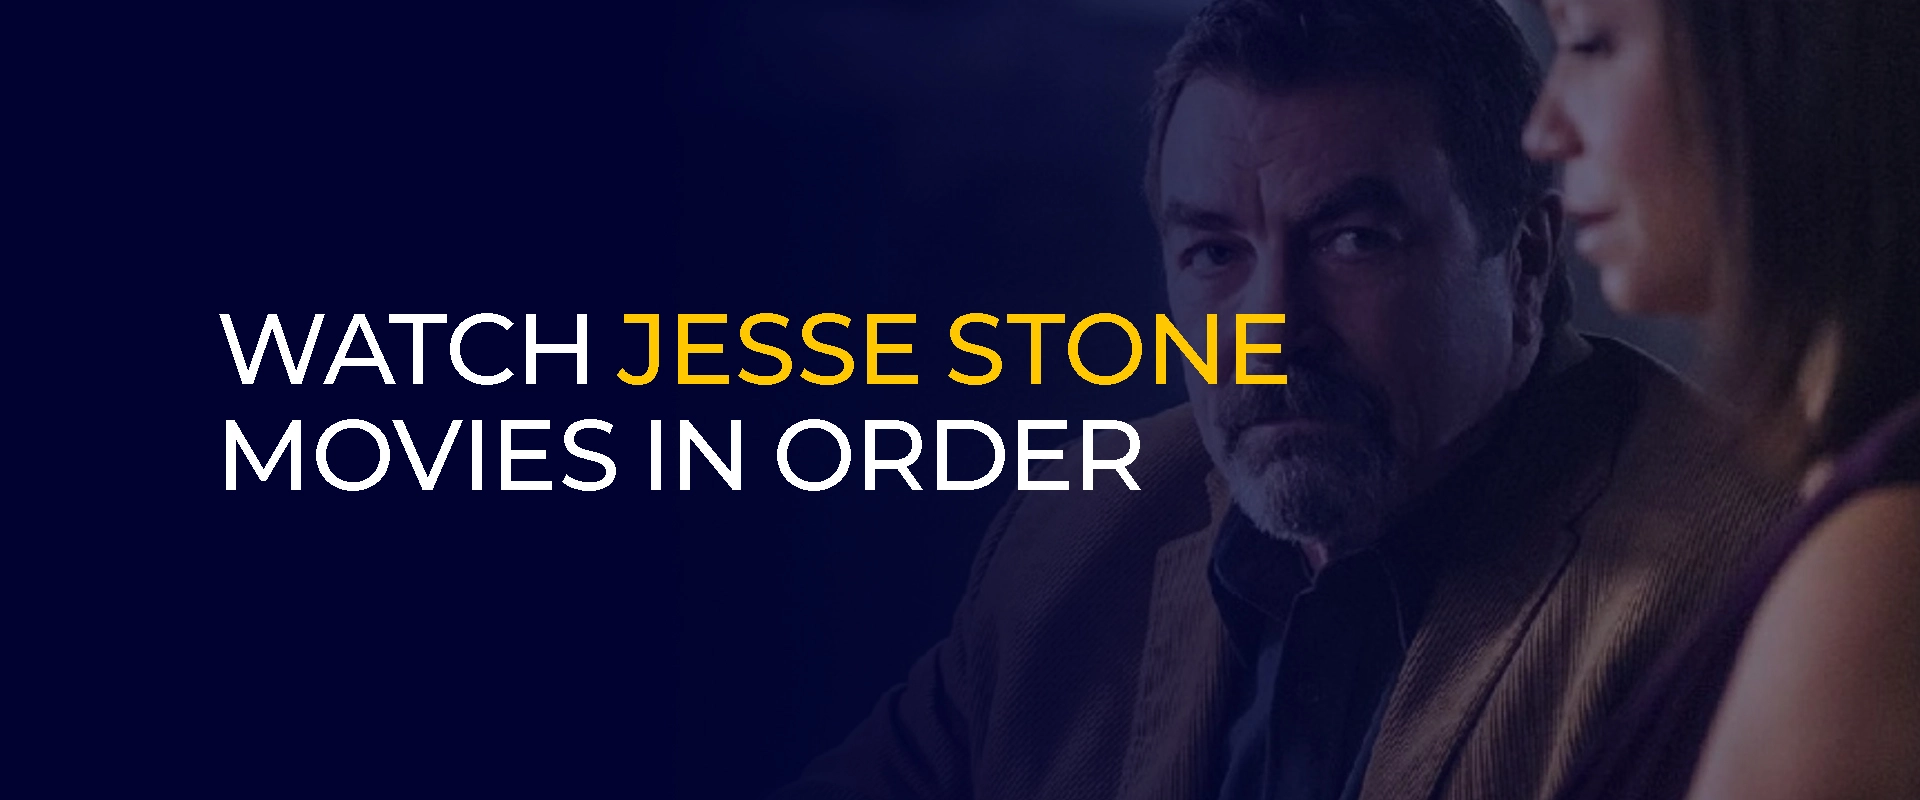 Watch-Jesse-Stone-Movies-in-Order